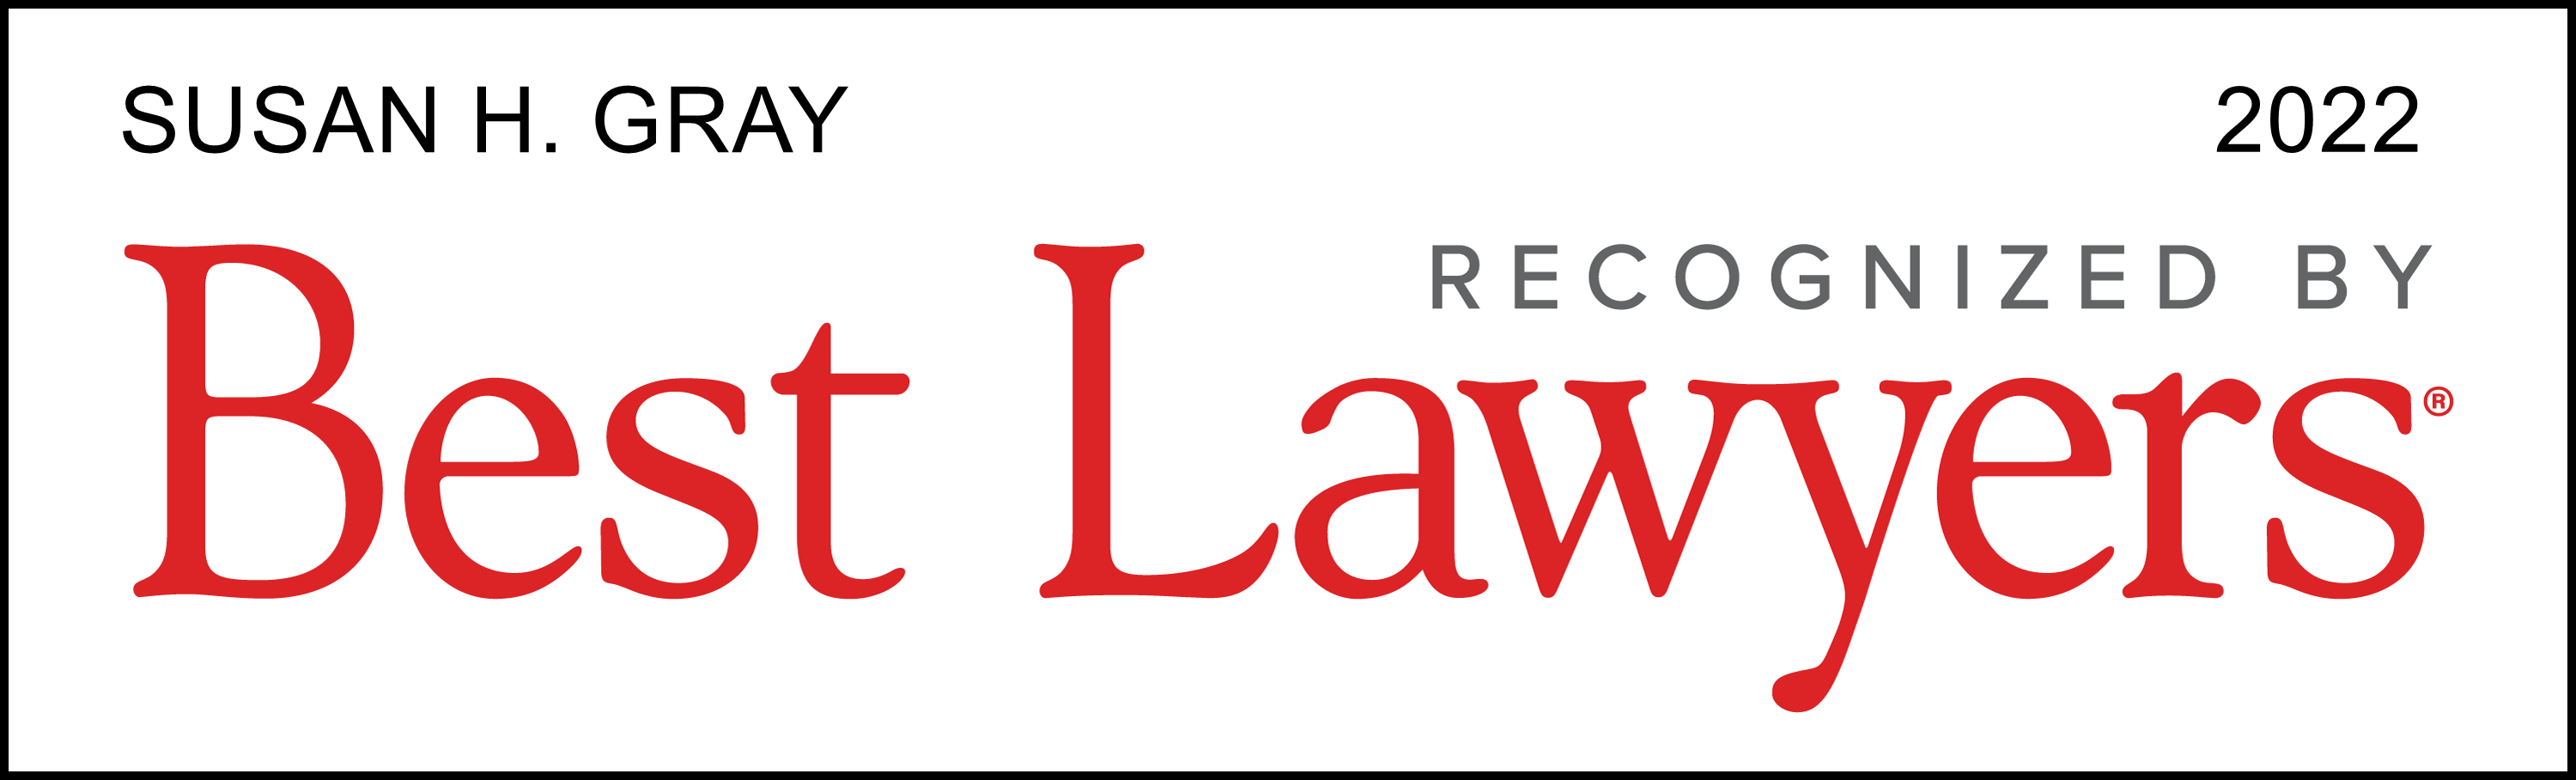 Susan H. Gray | 2022 Recognized By Best Lawyers